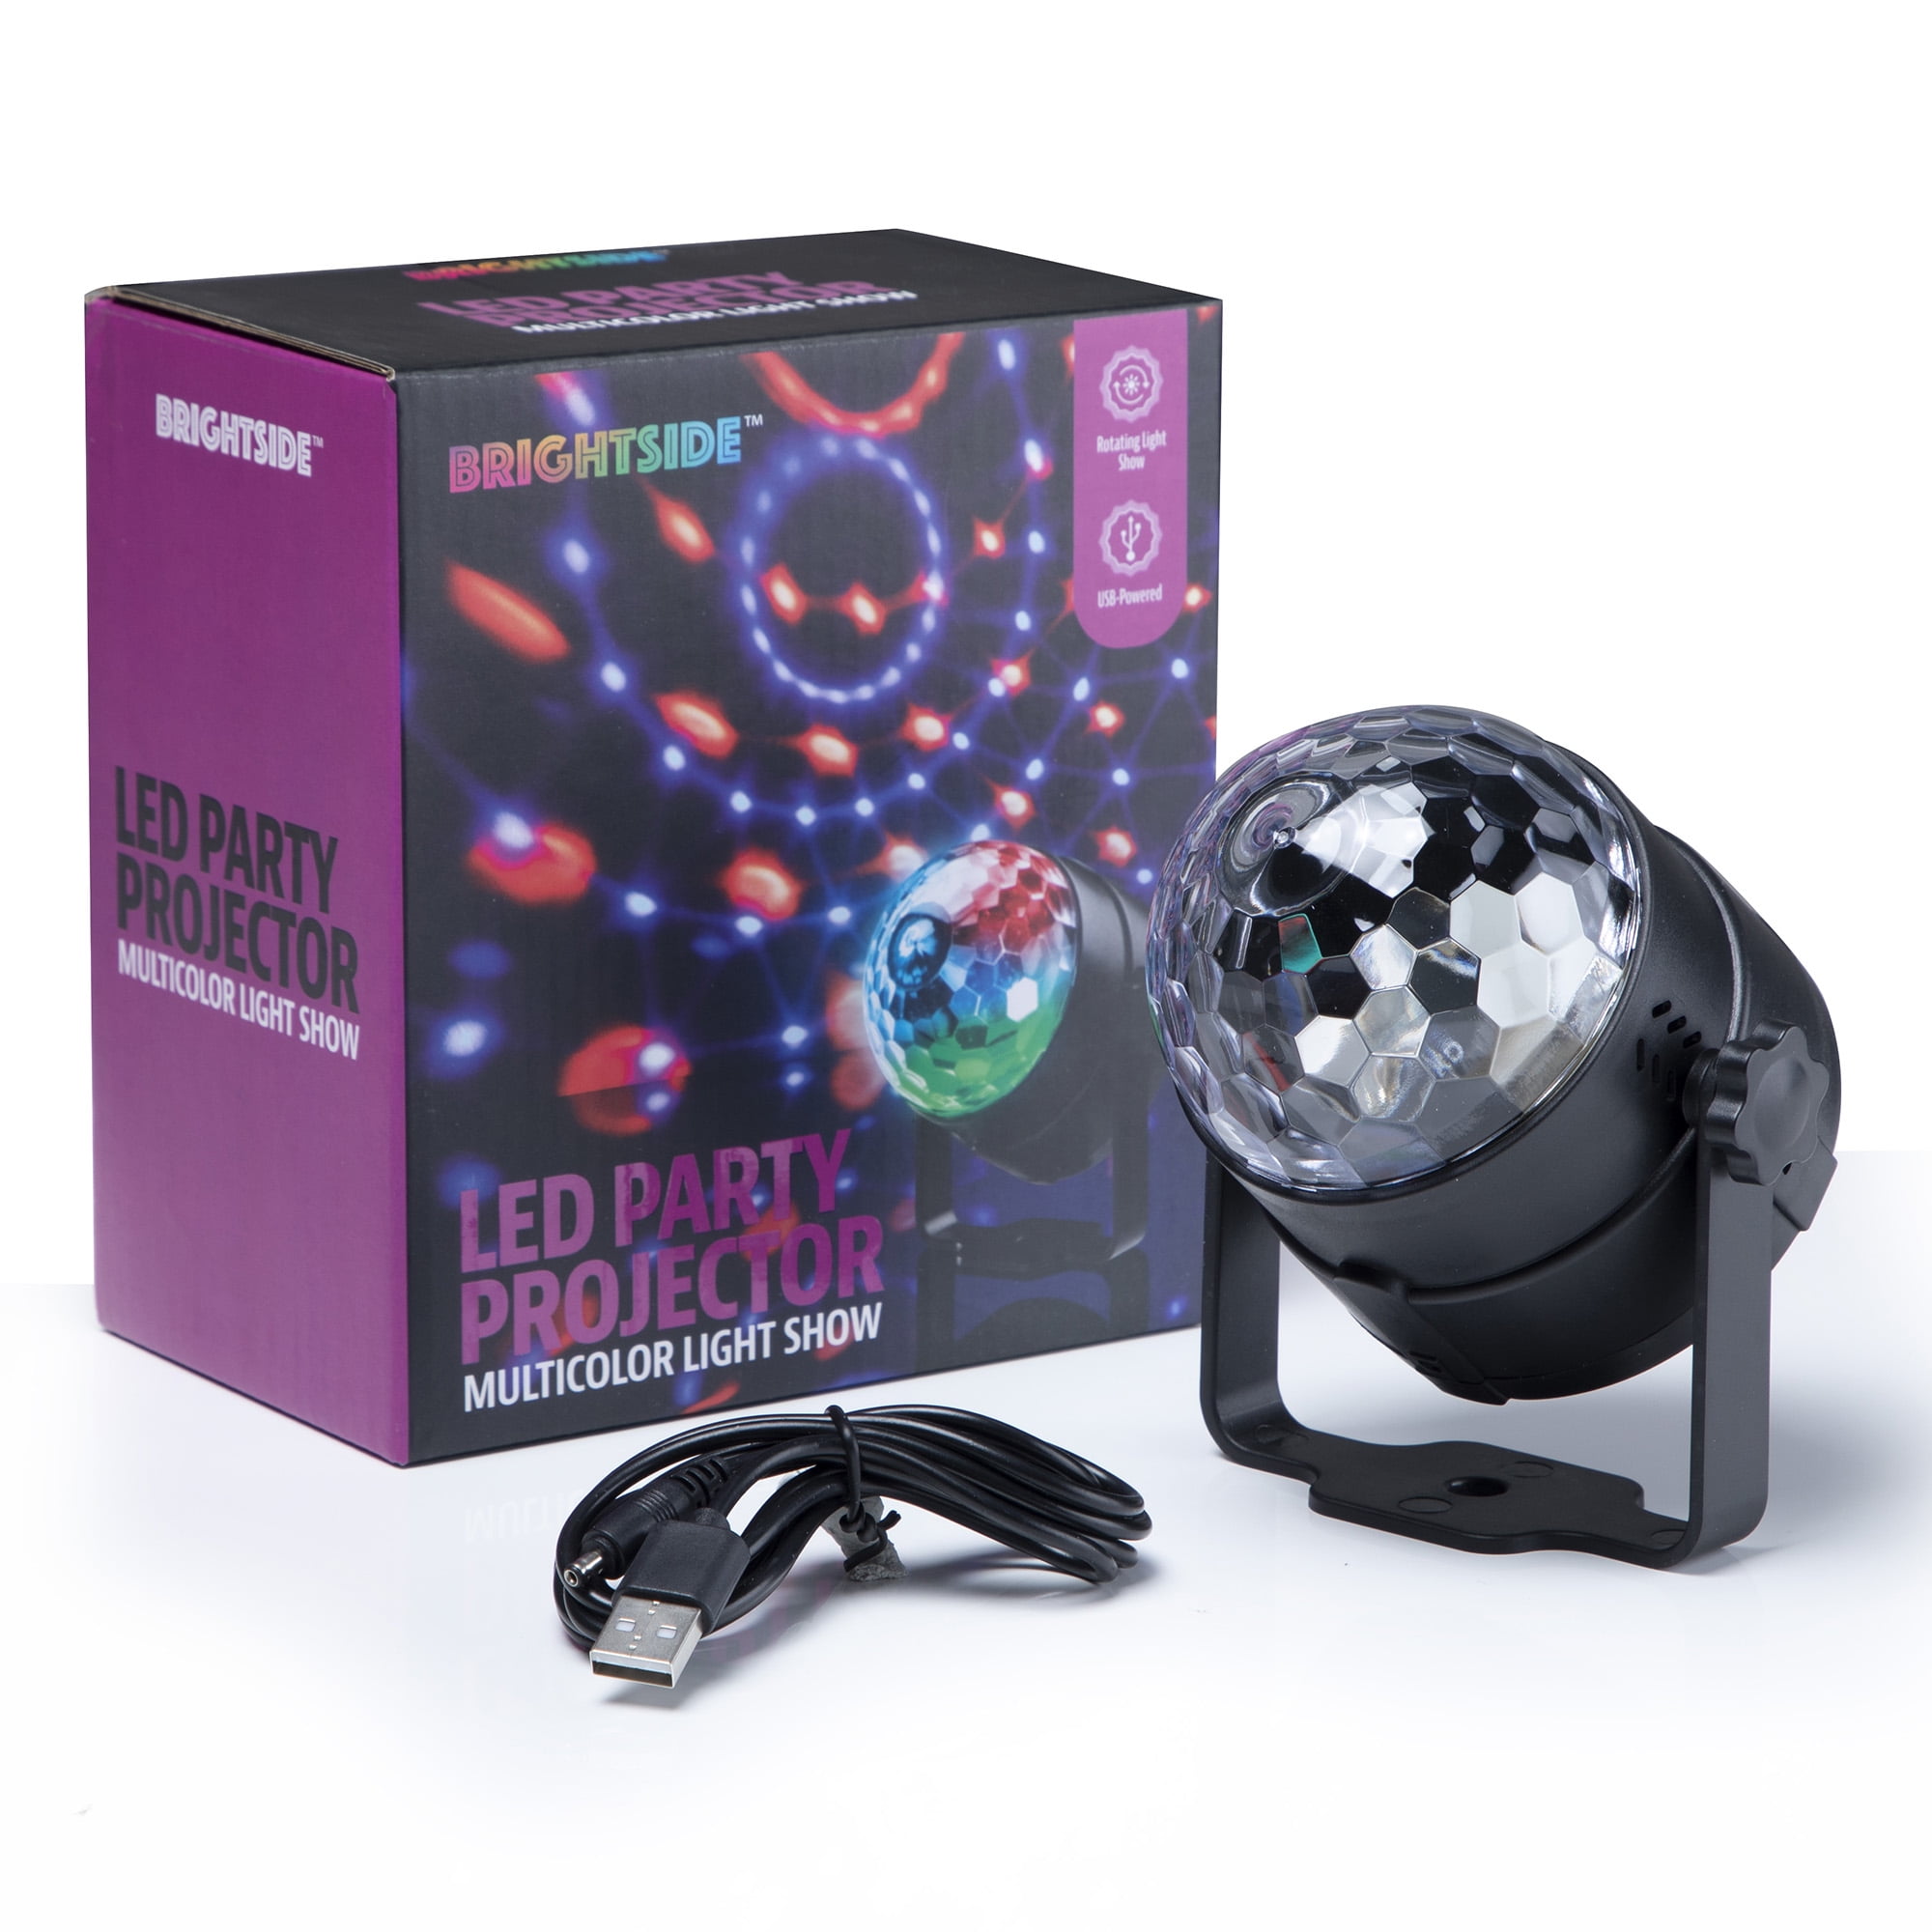 BrightSide Multicolor LED Disco Party Projector, Rotating Light Show, USB-Powered